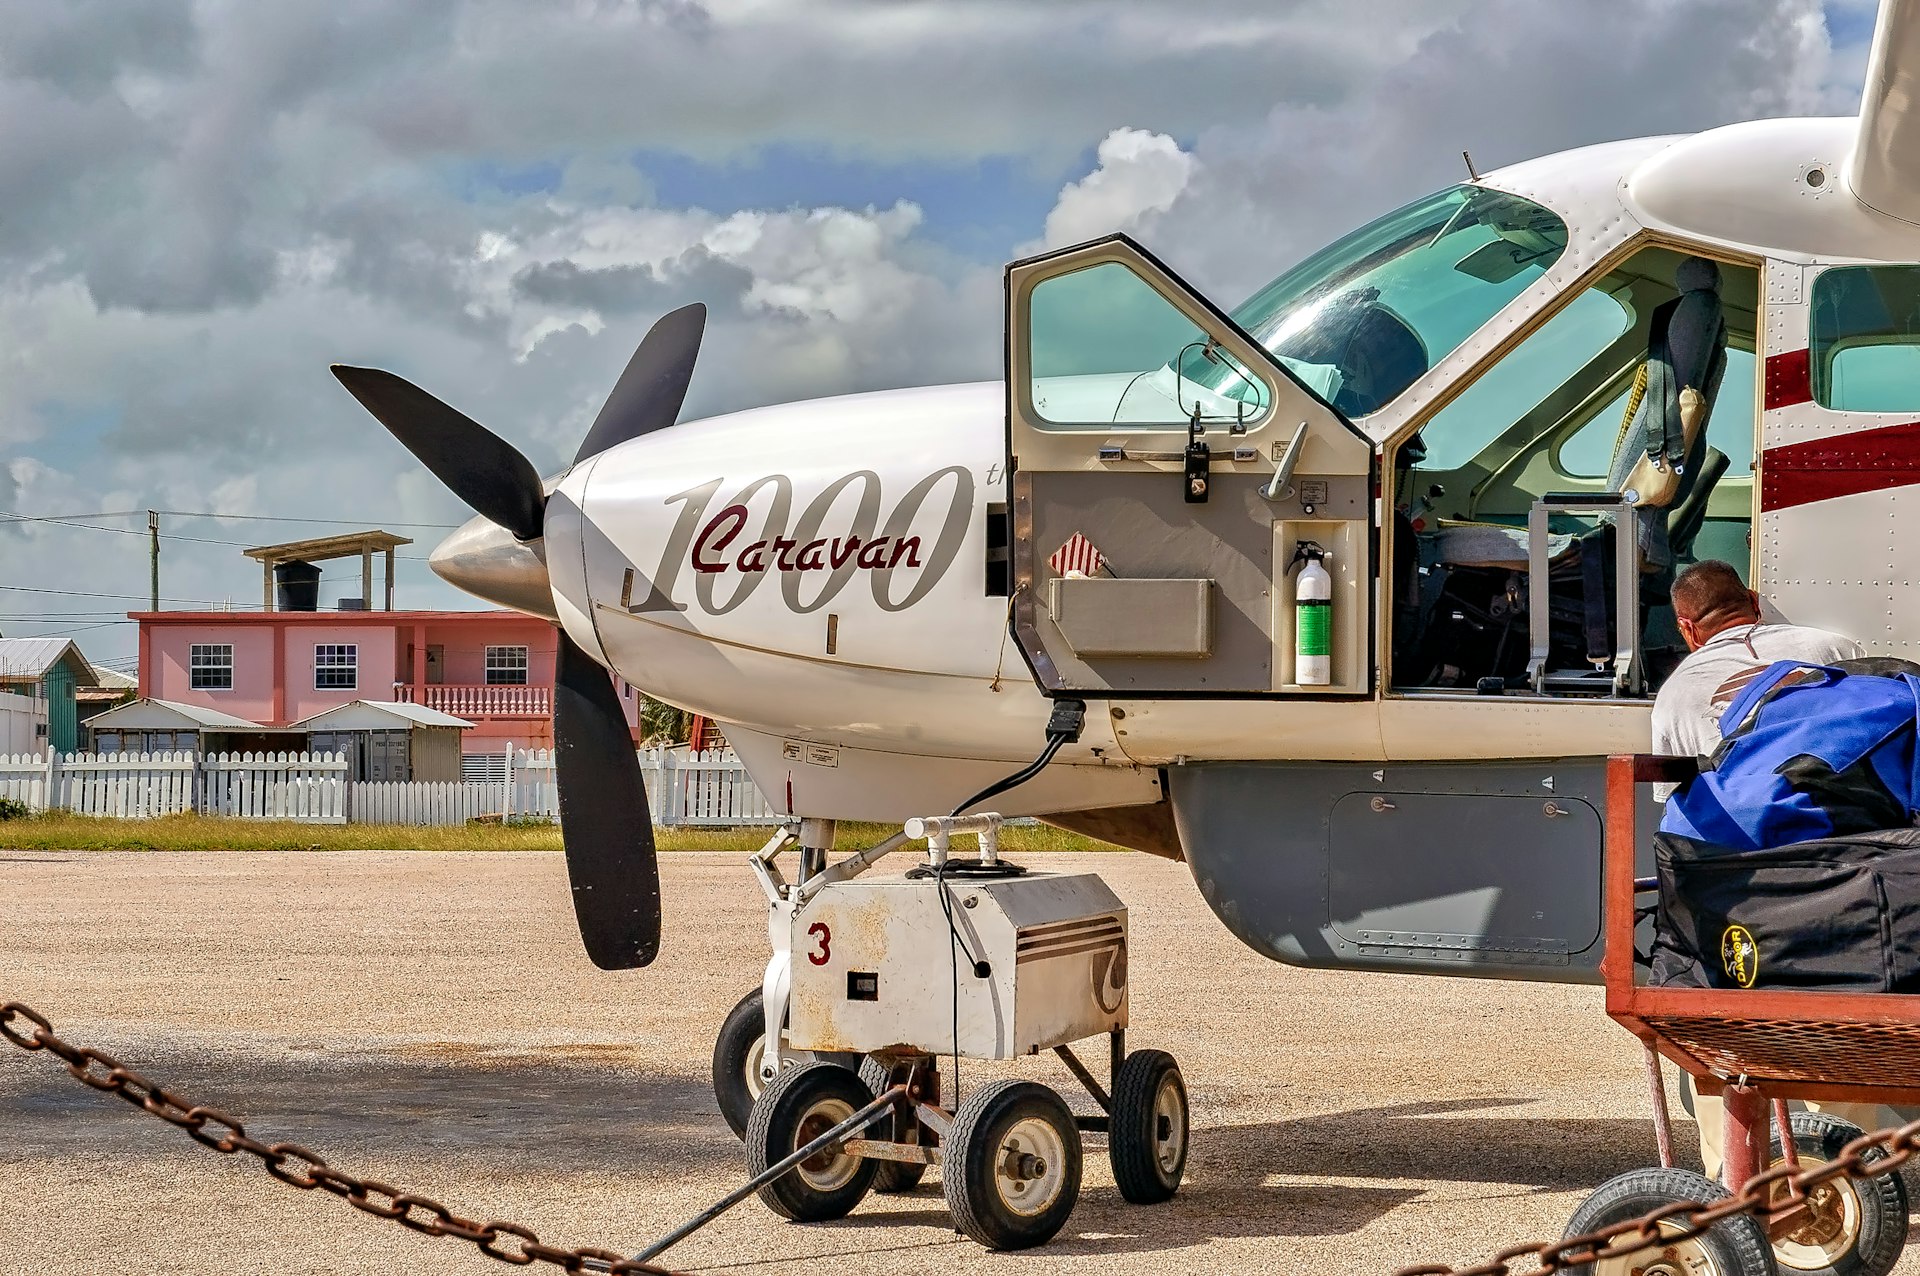 View of Cessna Caravan 1000 airplane getting ready to depart from San Pedro airport in Belize.